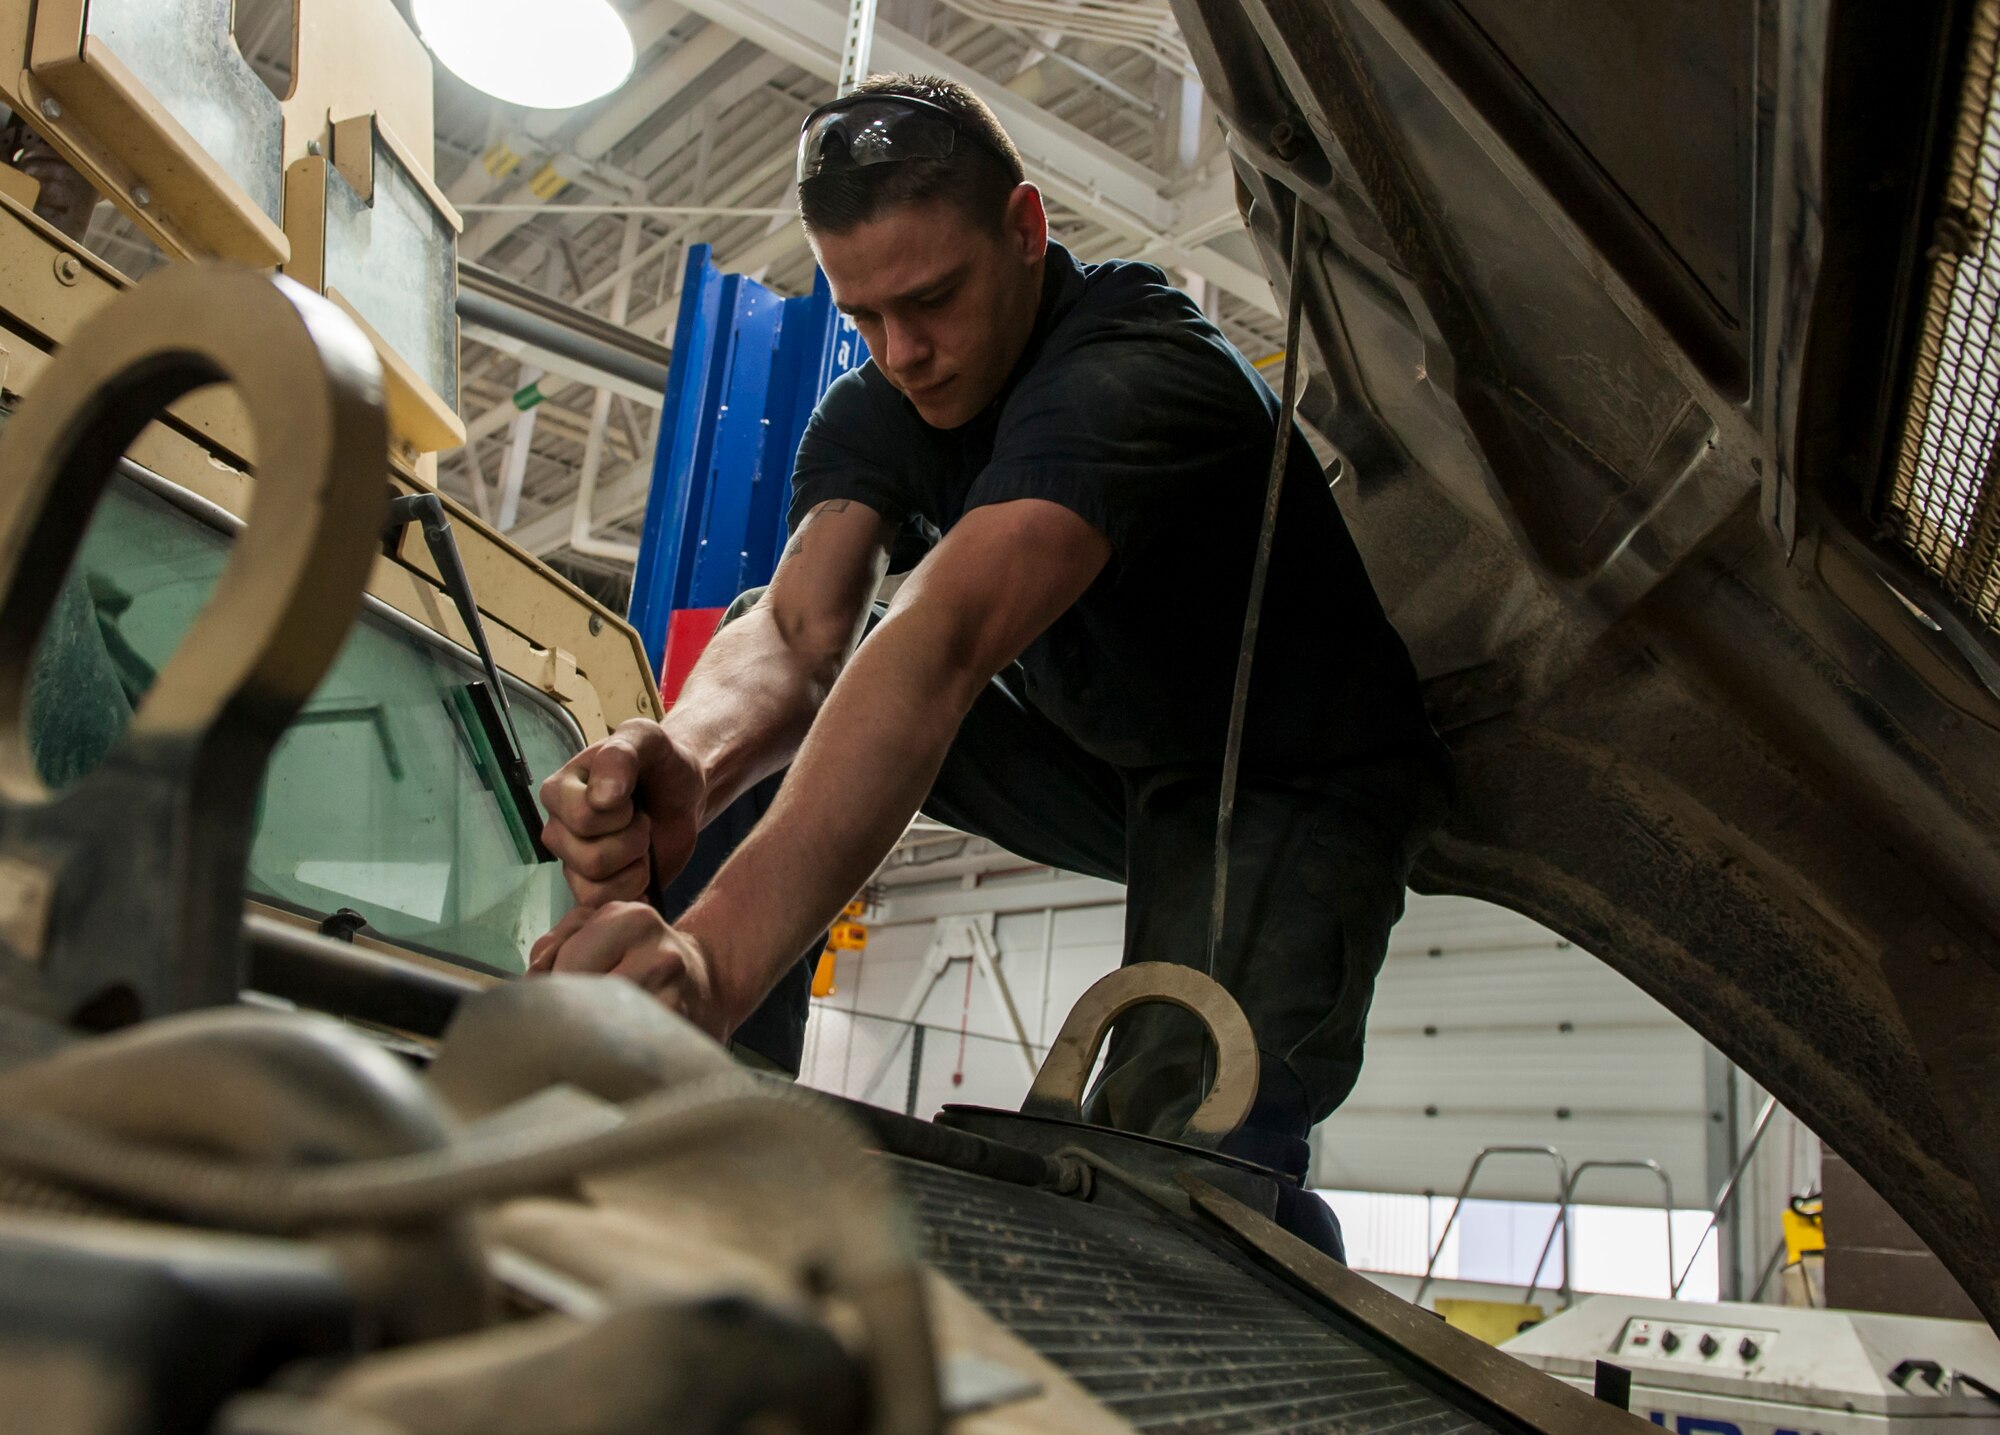 Senior Airman Connor Atwood, 341st Logistics Readiness Squadron vehicle maintenance journeyman, performs routine repairs on a Humvee June 11, 2019, at Malmstrom Air Force Base, Mont.